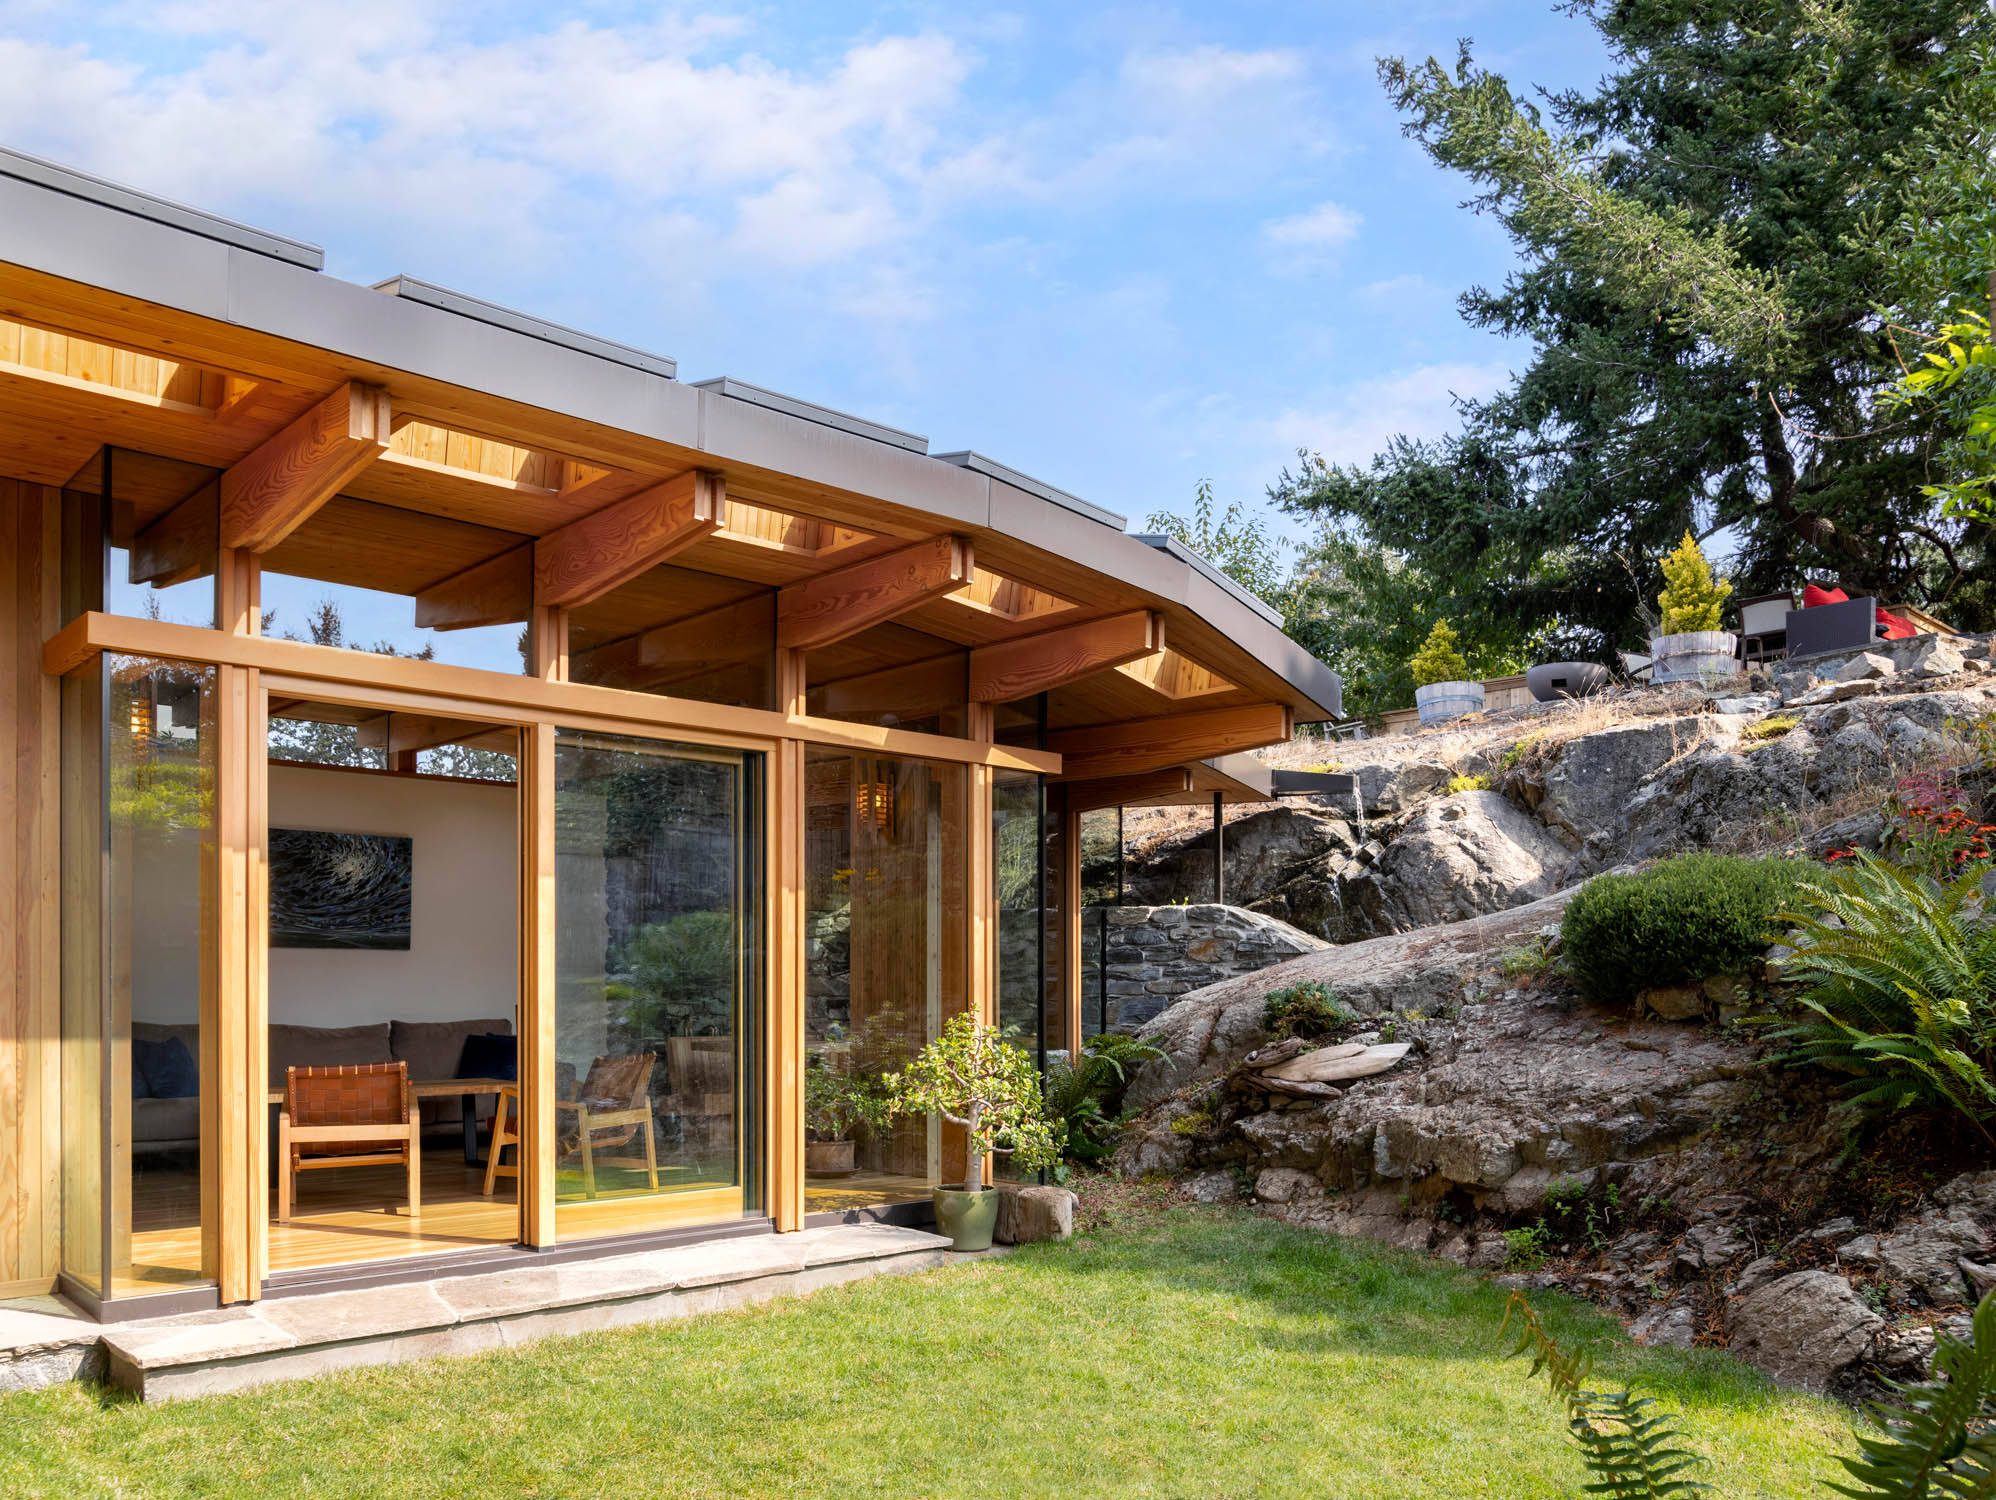 A bright and modern wood timber sunroom looks out at a naturally landscaped backyard.